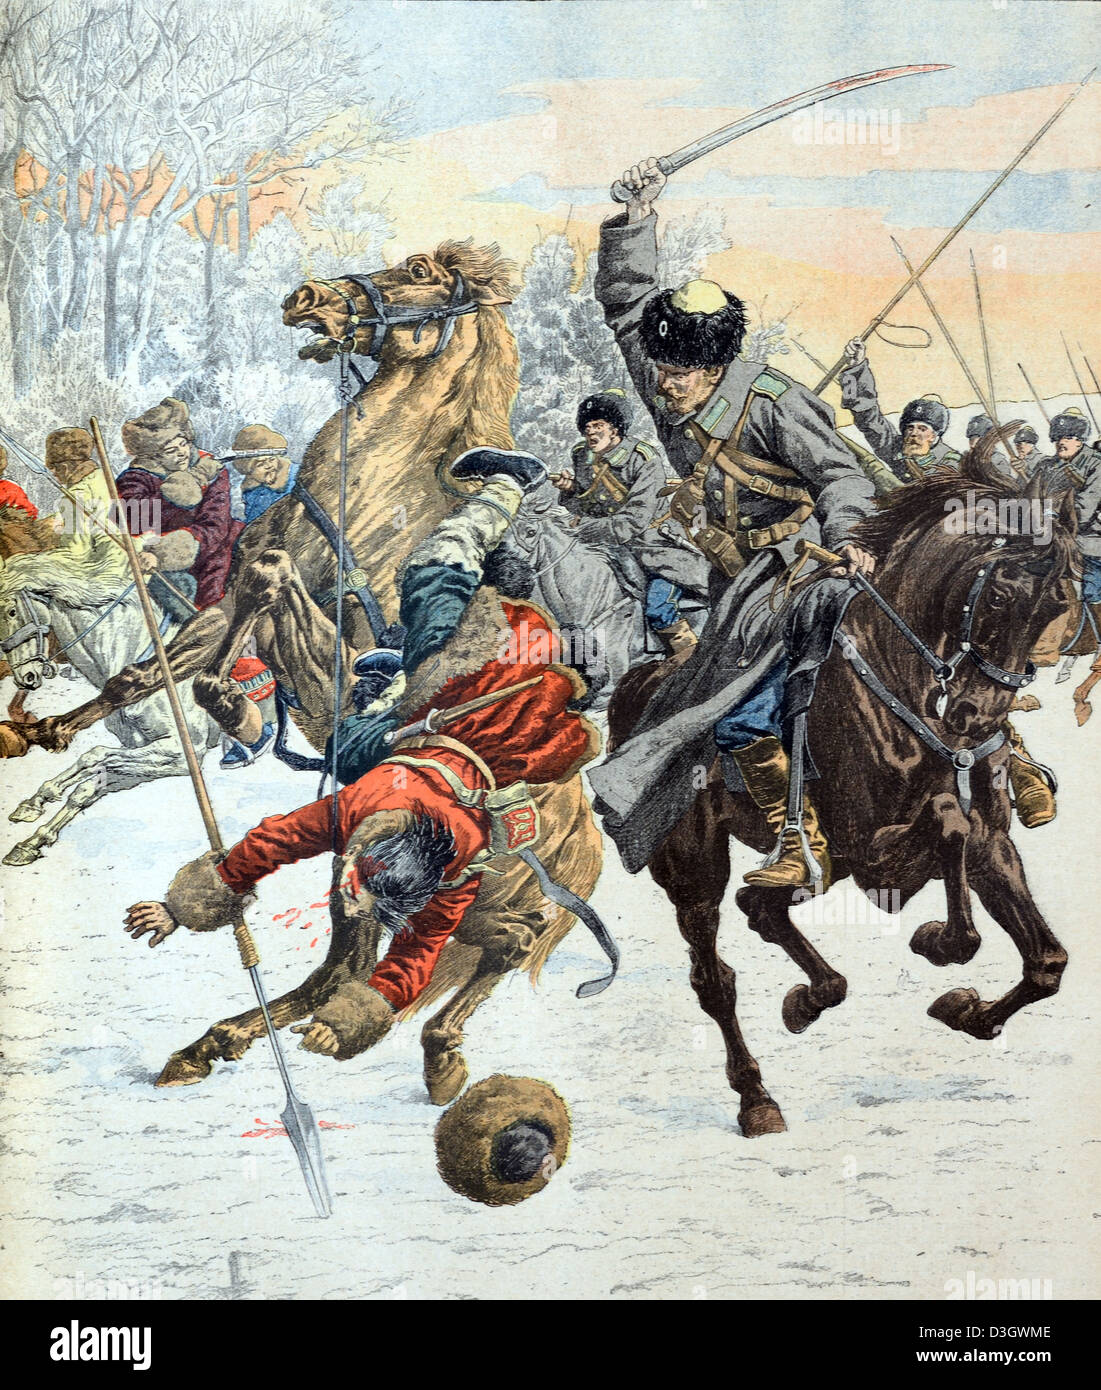 Cossacks Fighting Evenks in Siberia (April 1904). Cossacks used as Border Guards and Tax Collectors in Expanding Russian Empire. Vintage Illustration or Engraving Stock Photo